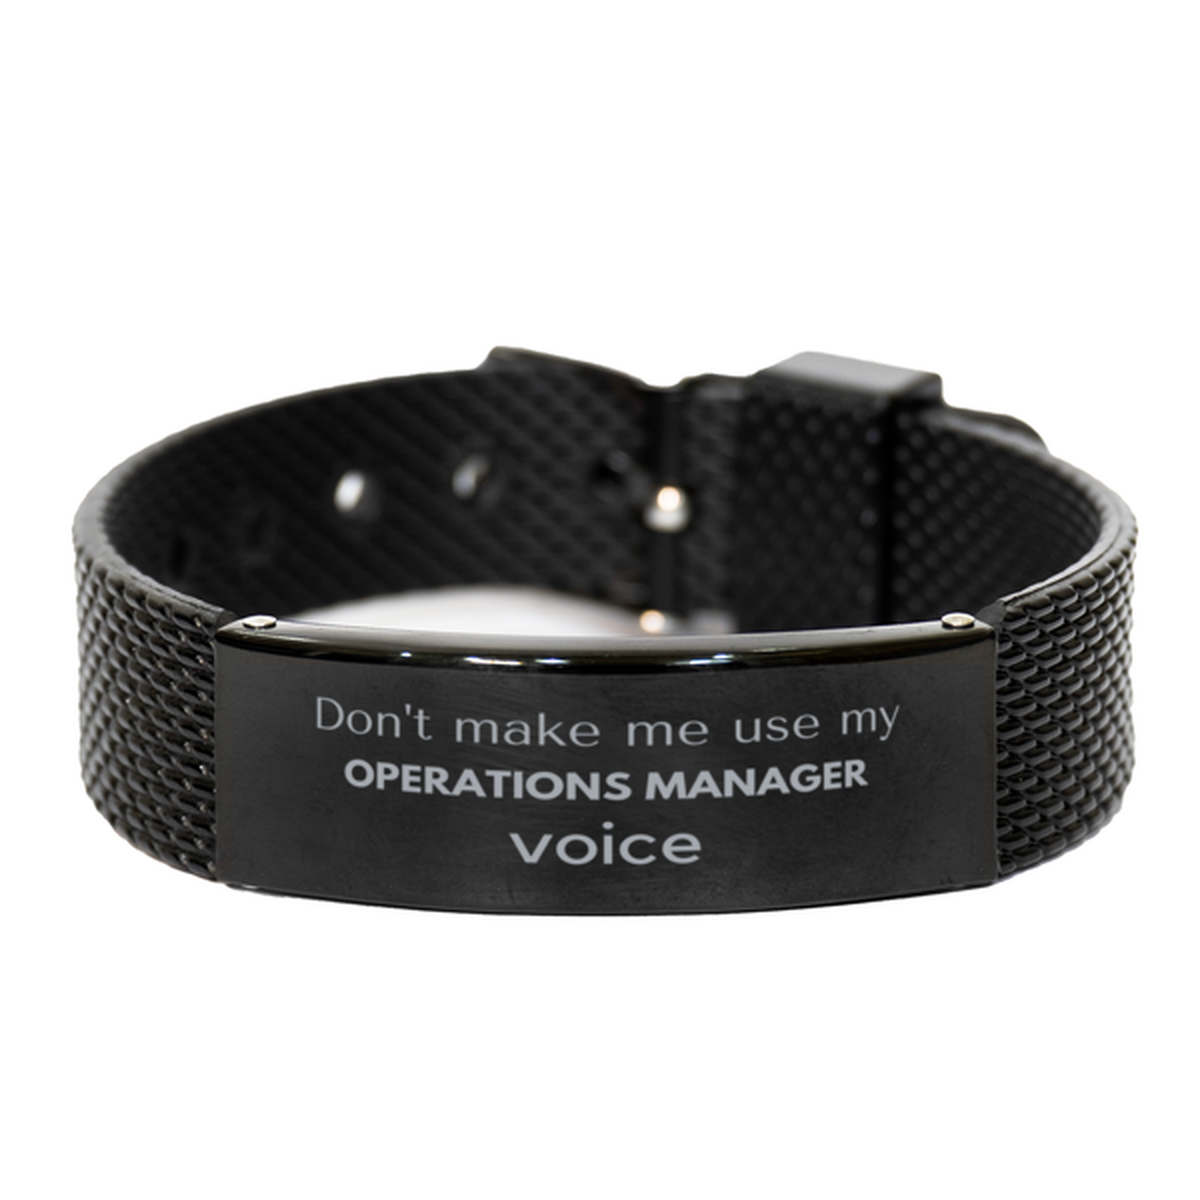 Don't make me use my Operations Manager voice, Sarcasm Operations Manager Gifts, Christmas Operations Manager Black Shark Mesh Bracelet Birthday Unique Gifts For Operations Manager Coworkers, Men, Women, Colleague, Friends